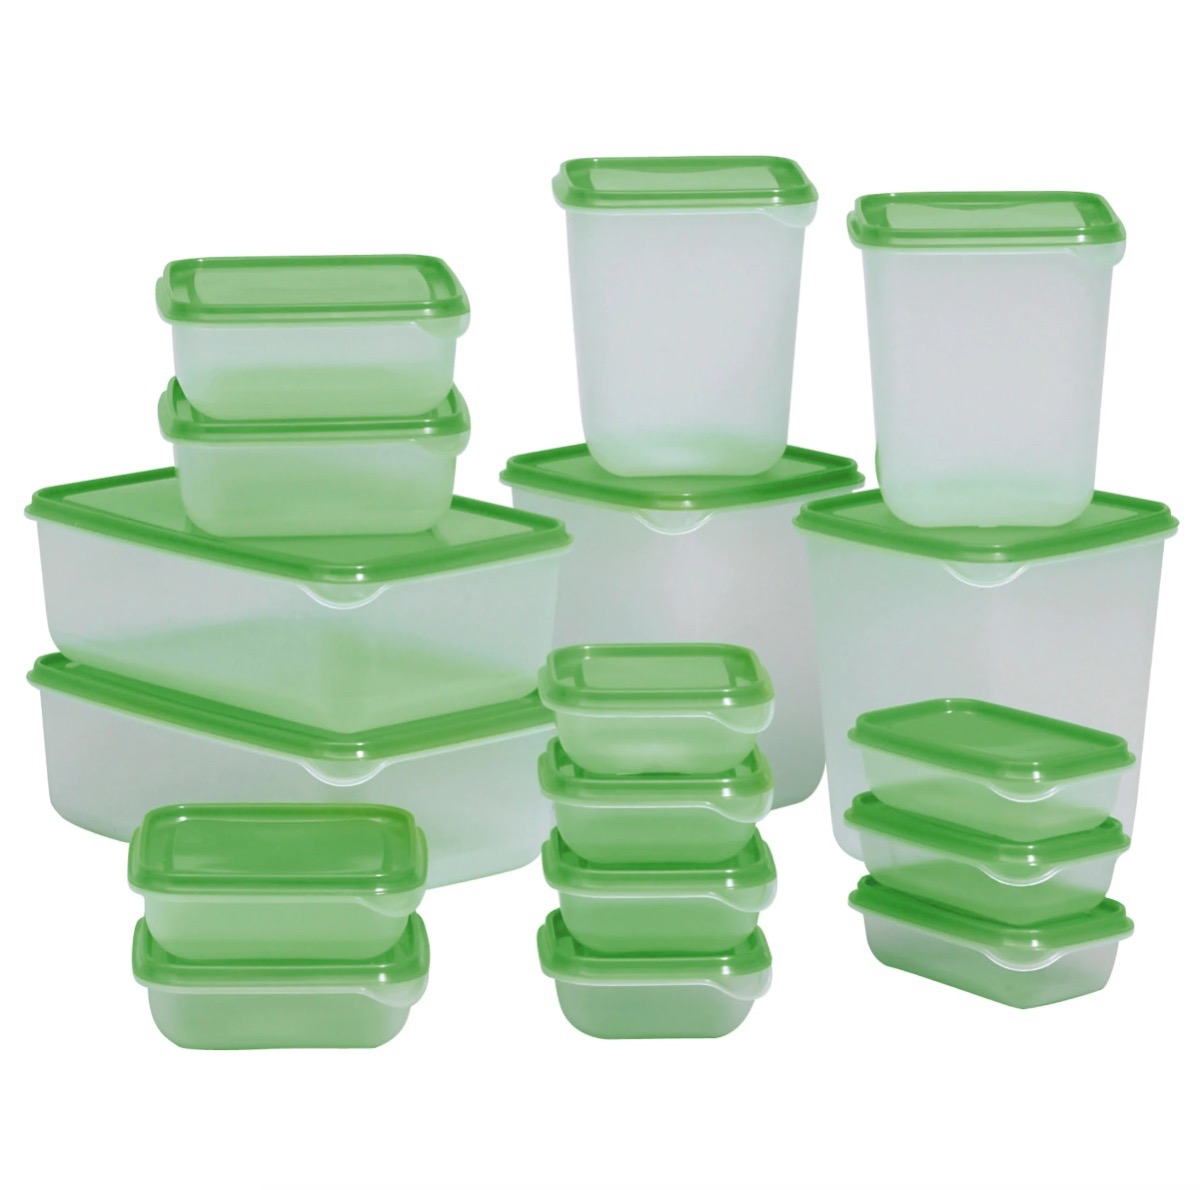 Ikea Containers {Never Buy at Ikea}